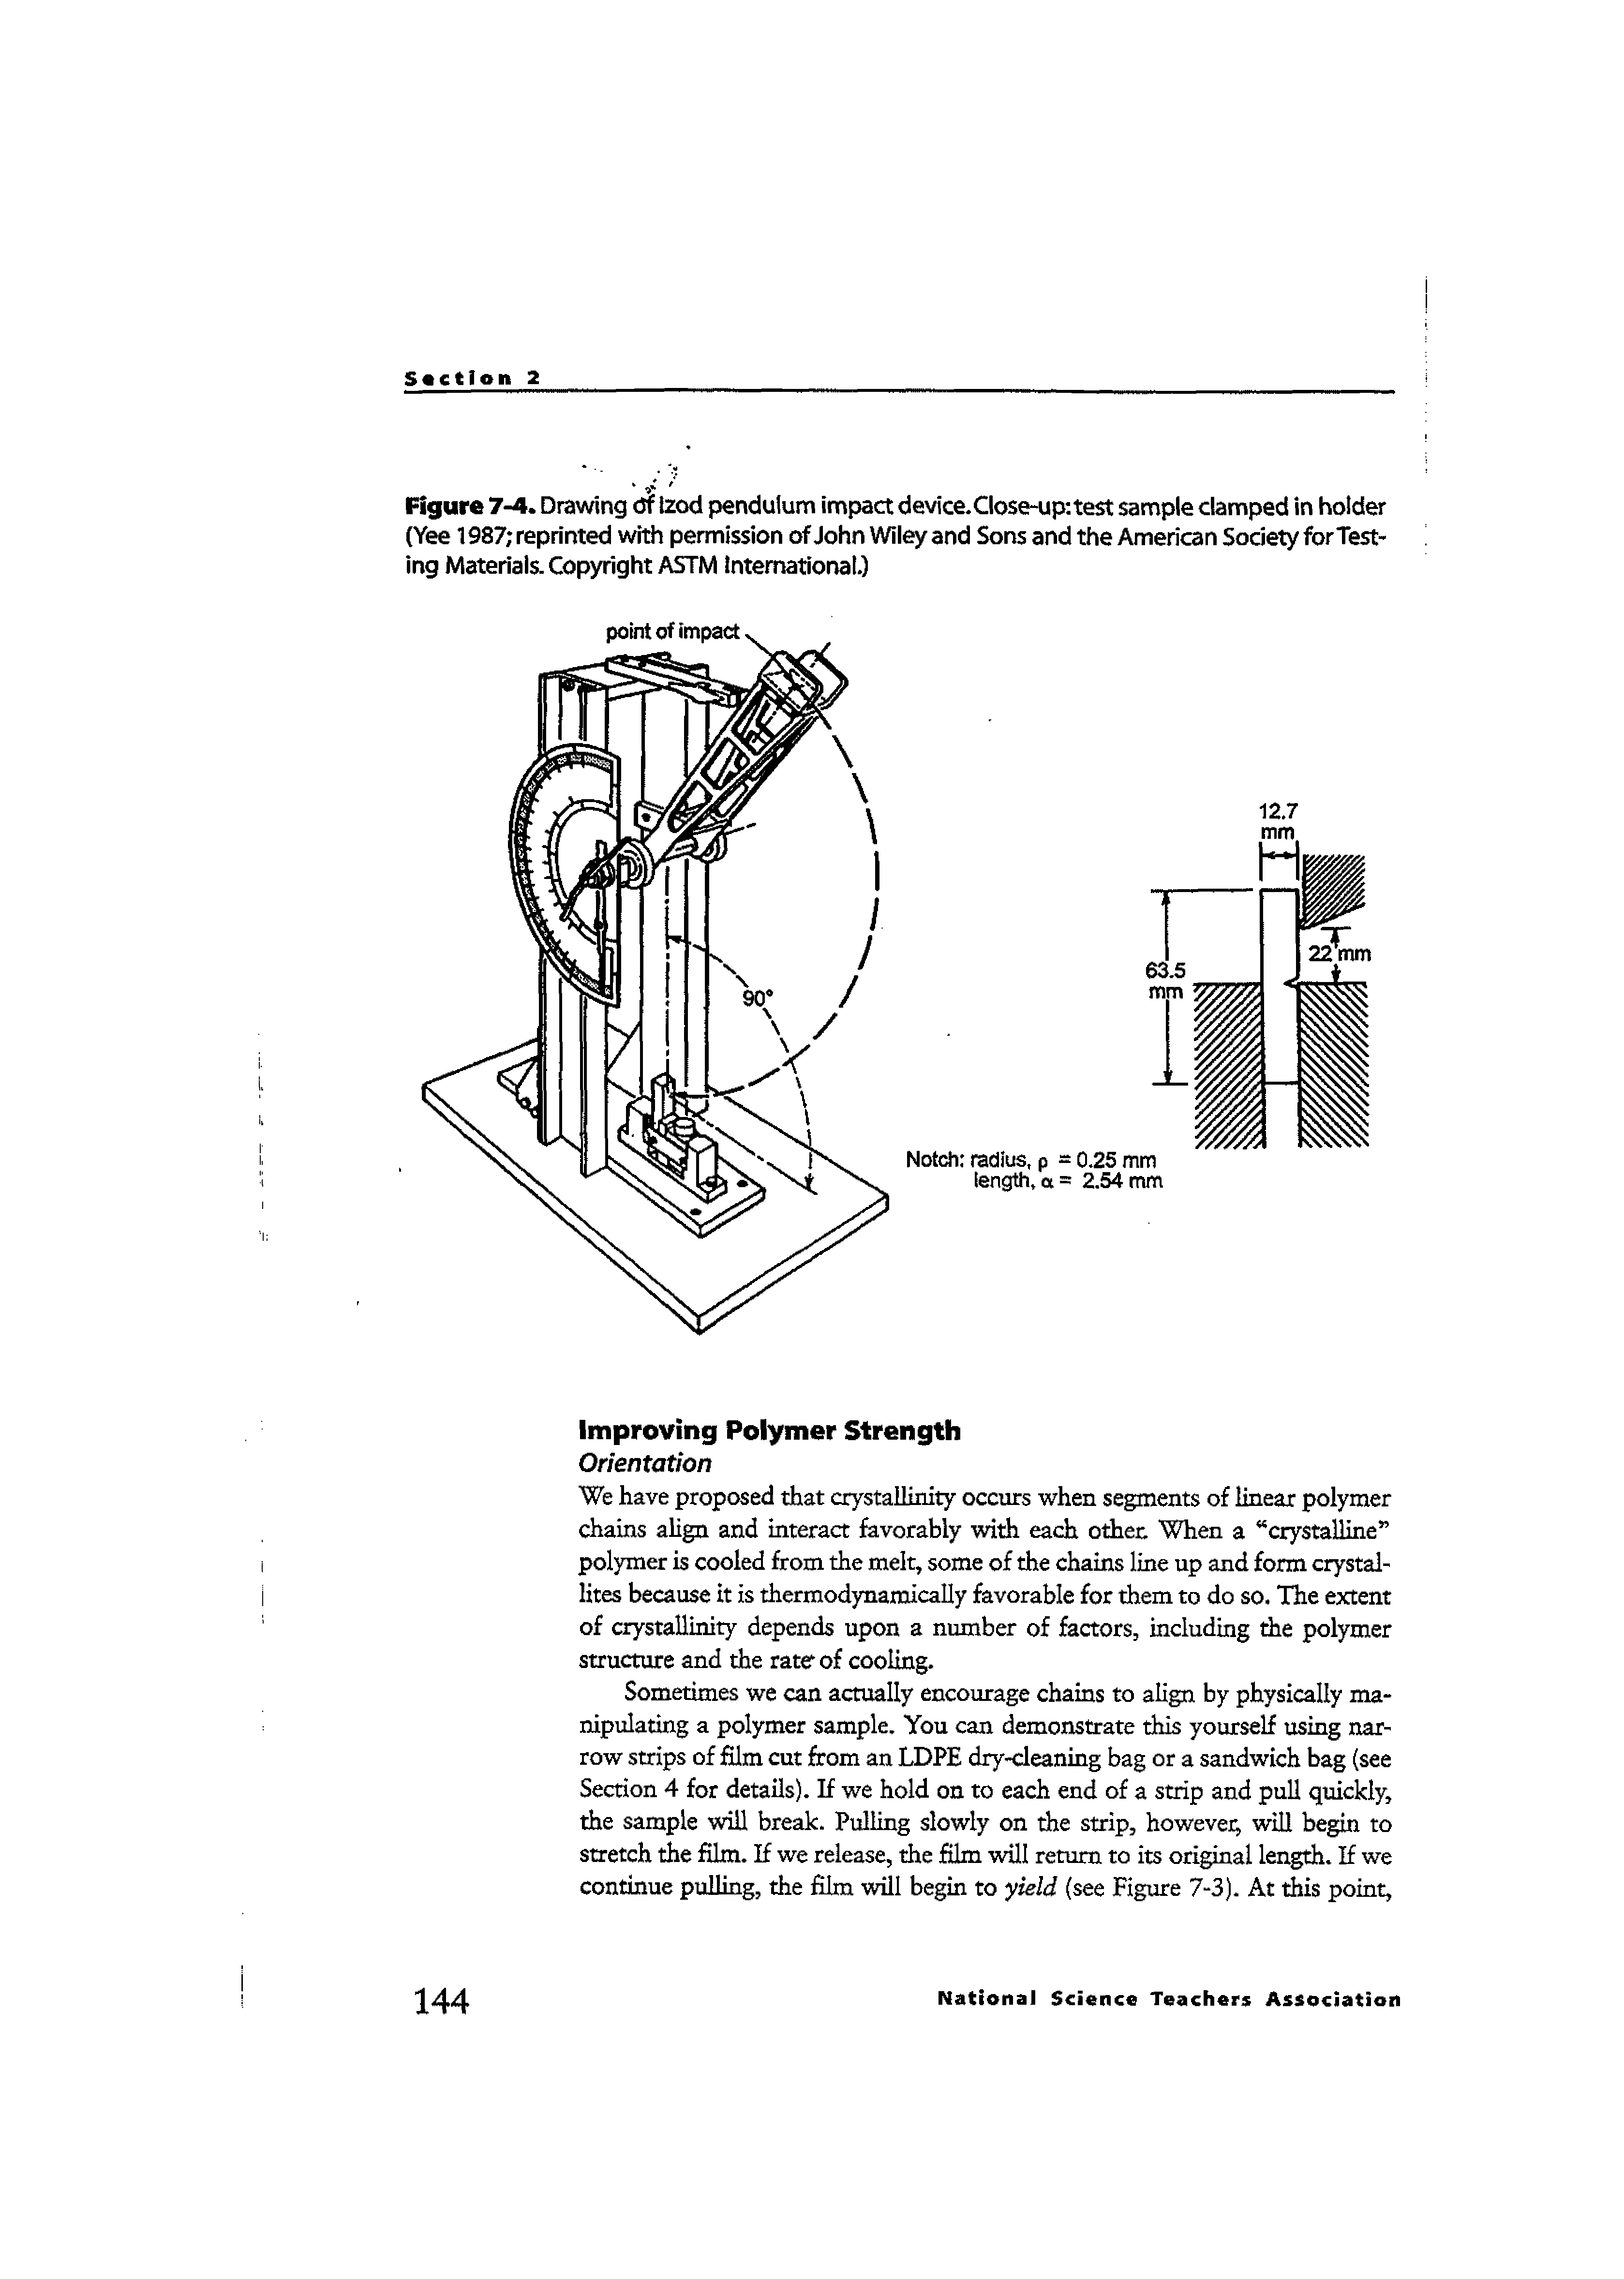 Figure 7-4. Drawing d Izod pendulum impact device. Close-up test sample clamped in holder (Yee 1987 reprinted with permission of John Wiley and Sons and the American Society for Testing Materials. Copyright ASTM International.)...